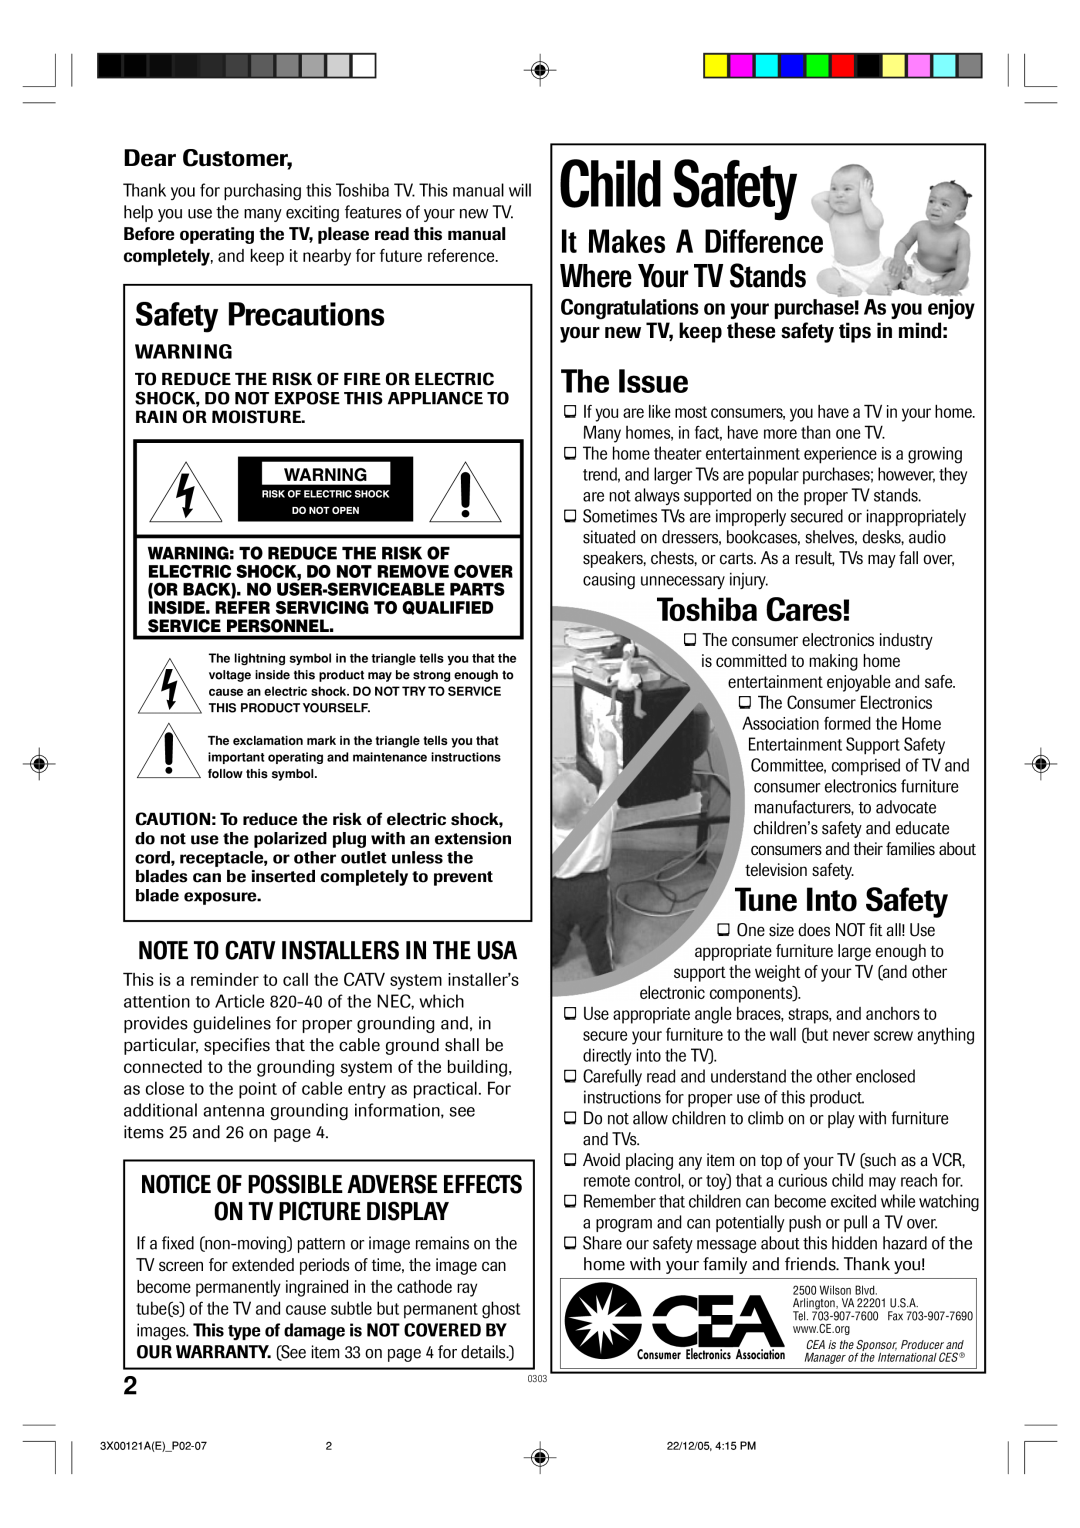 Toshiba 13A26 manual Child Safety, Safety Precautions, It Makes A Difference Where Your TV Stands, The Issue, Toshiba Cares 